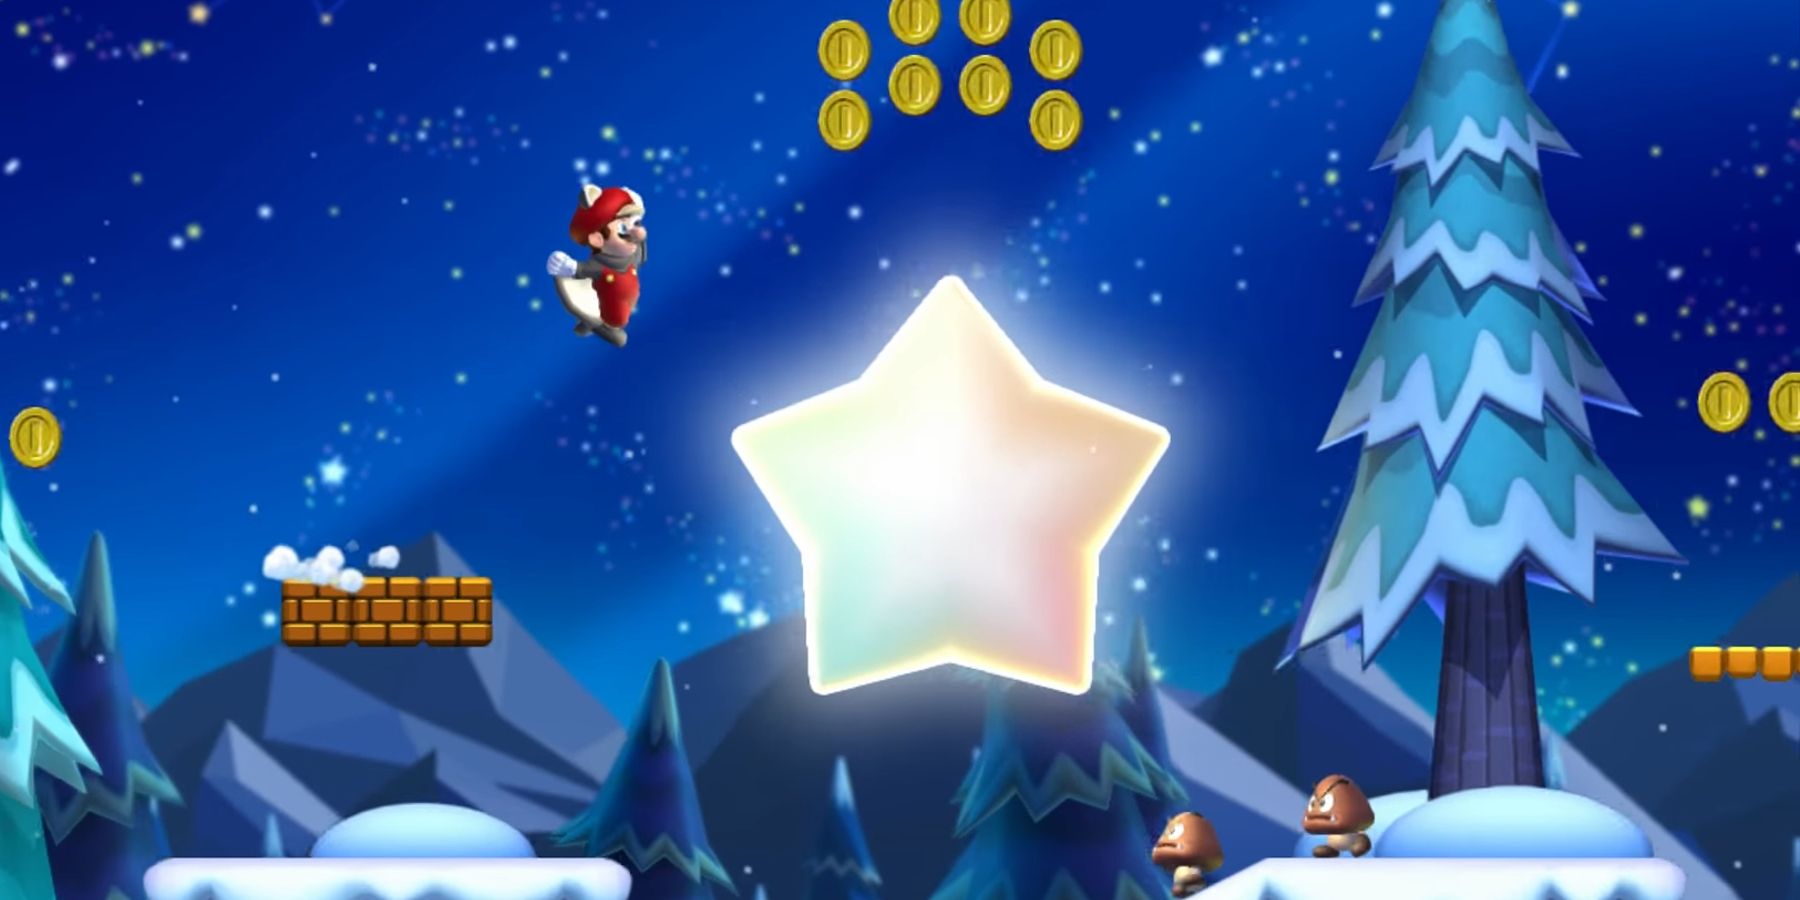 Mario leaping through the air in Spinning Star-Sky in New Super Mario Bros. U